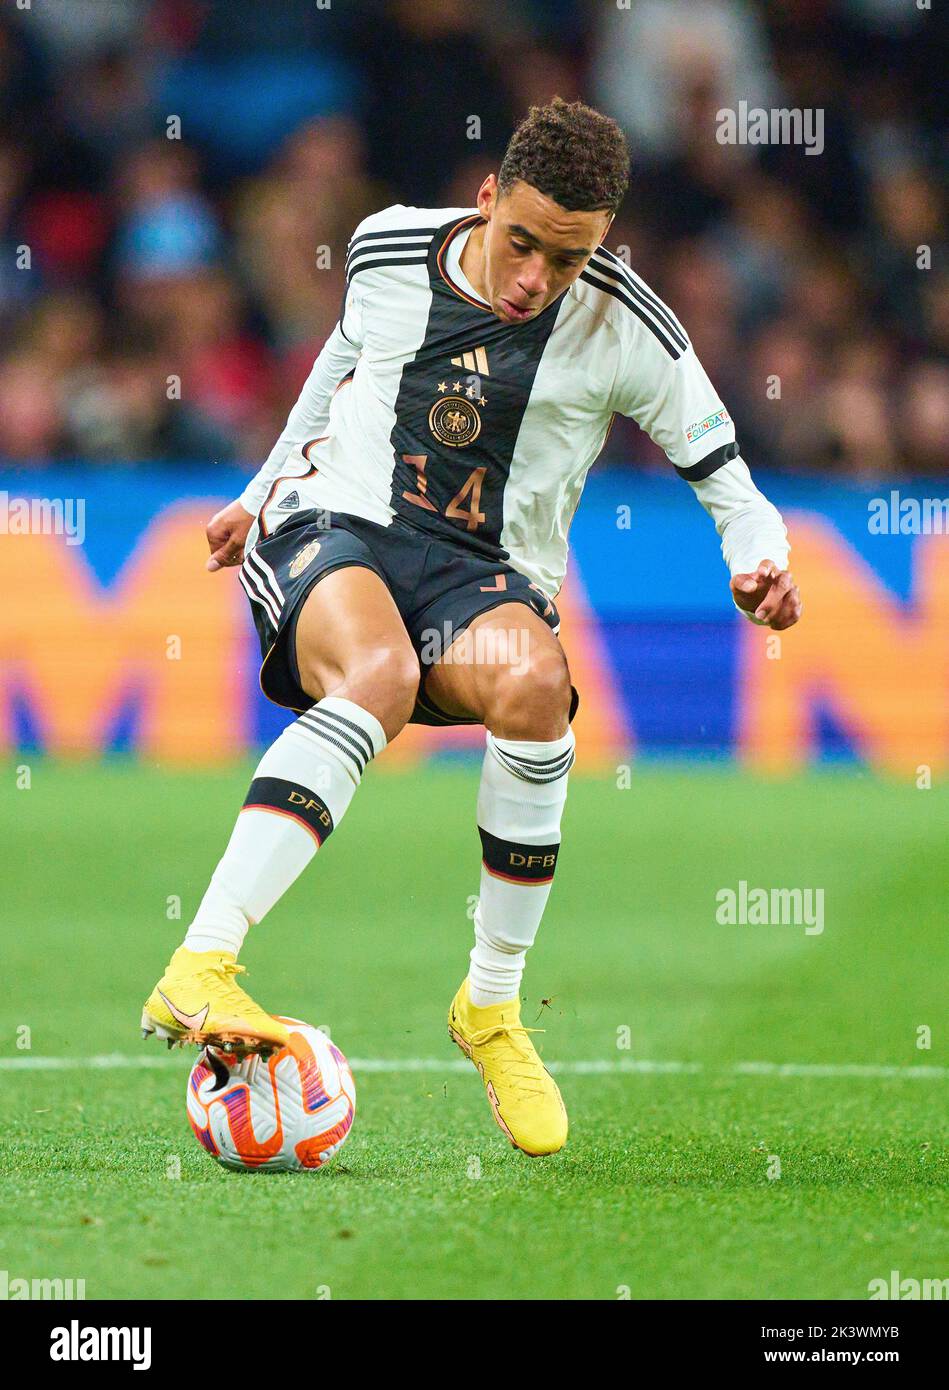 Jamal Musiala, DFB 14  in the UEFA Nations League 2022 match  ENGLAND - GERMANY 3-3  in Season 2022/2023 on Sept 26, 2022  in London, Great Britain.  © Peter Schatz / Alamy Live News Stock Photo